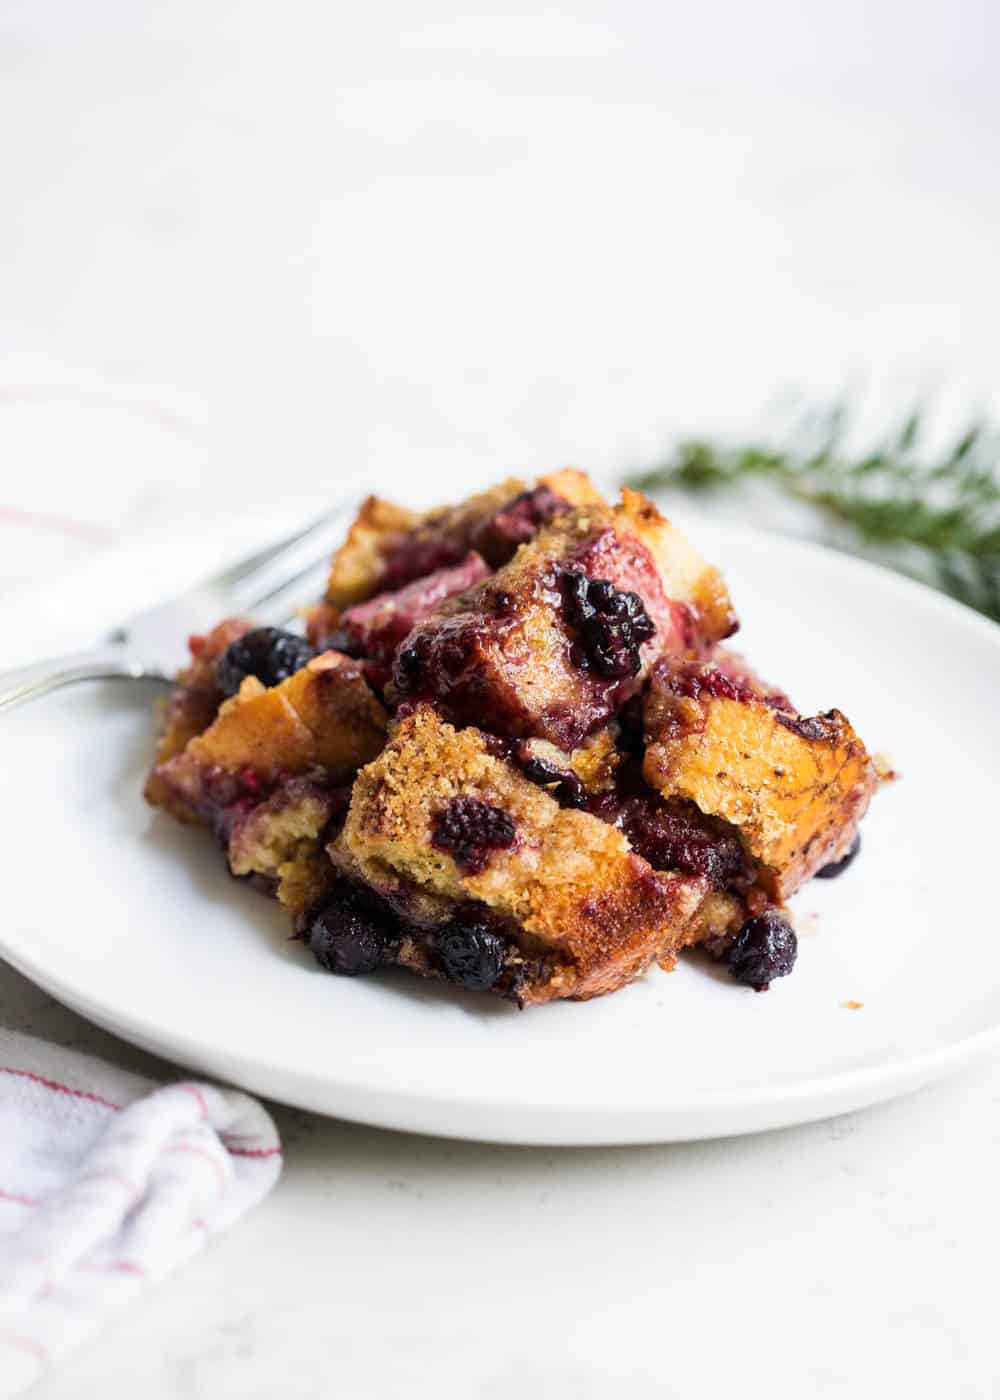 Berry french toast casserole on plate.